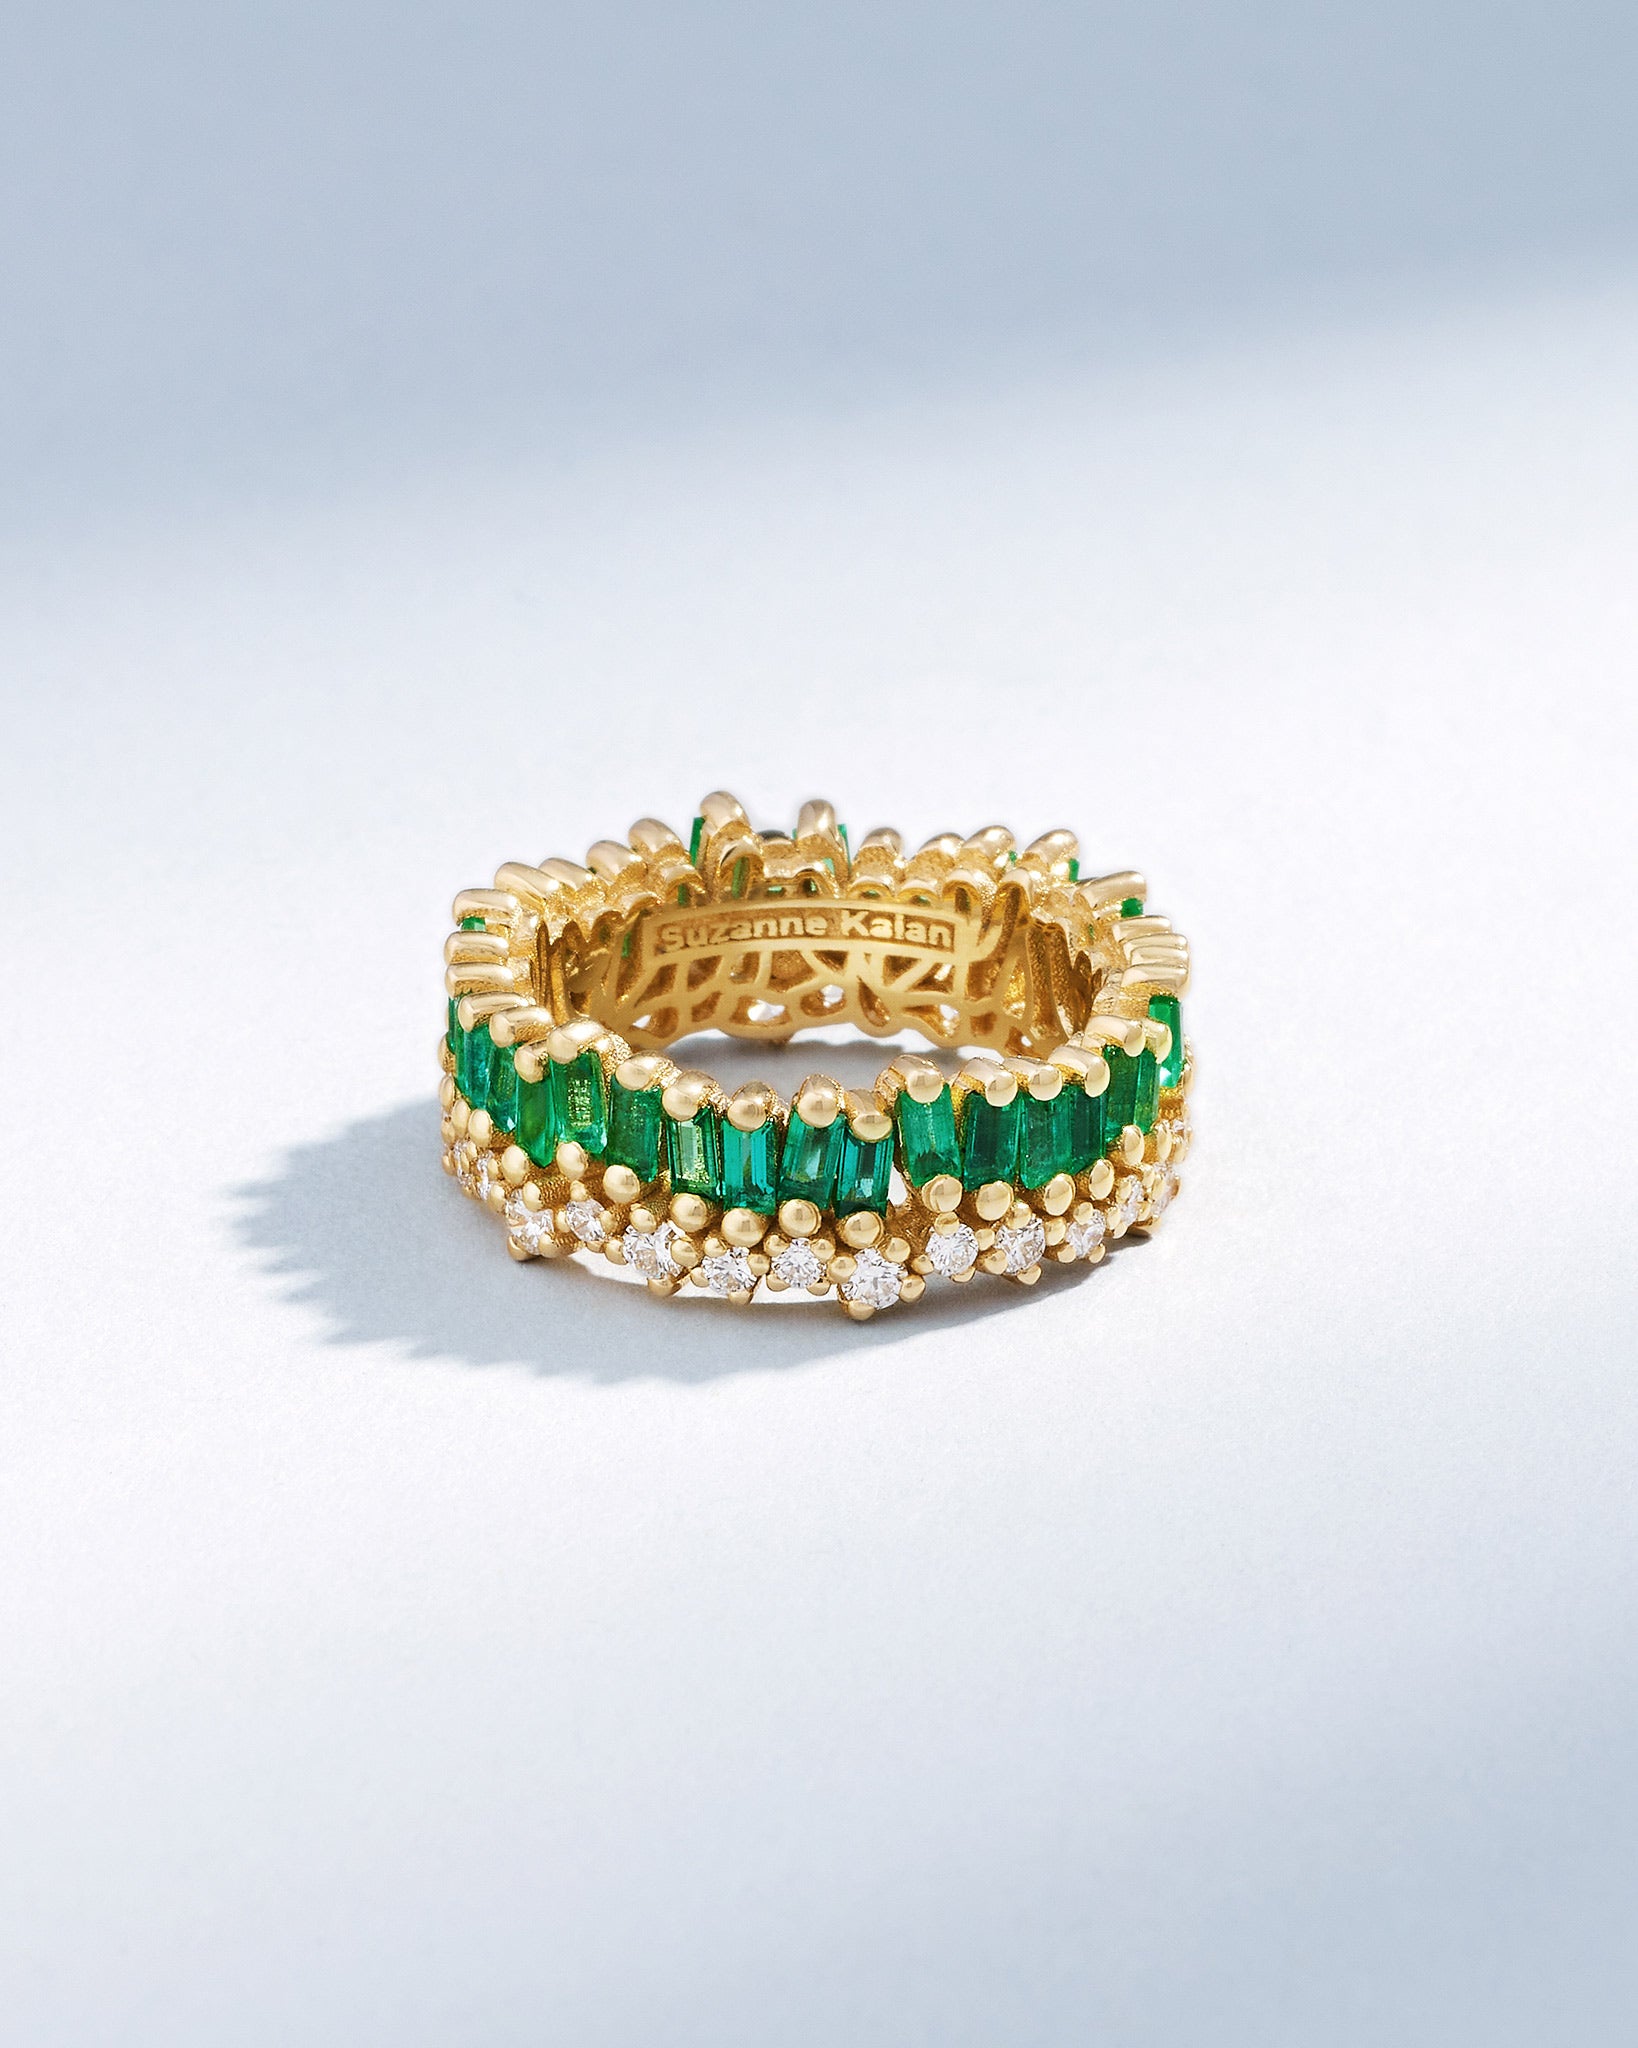 Suzanne Kalan Short Stack Emerald Eternity Band in 18k yellow gold